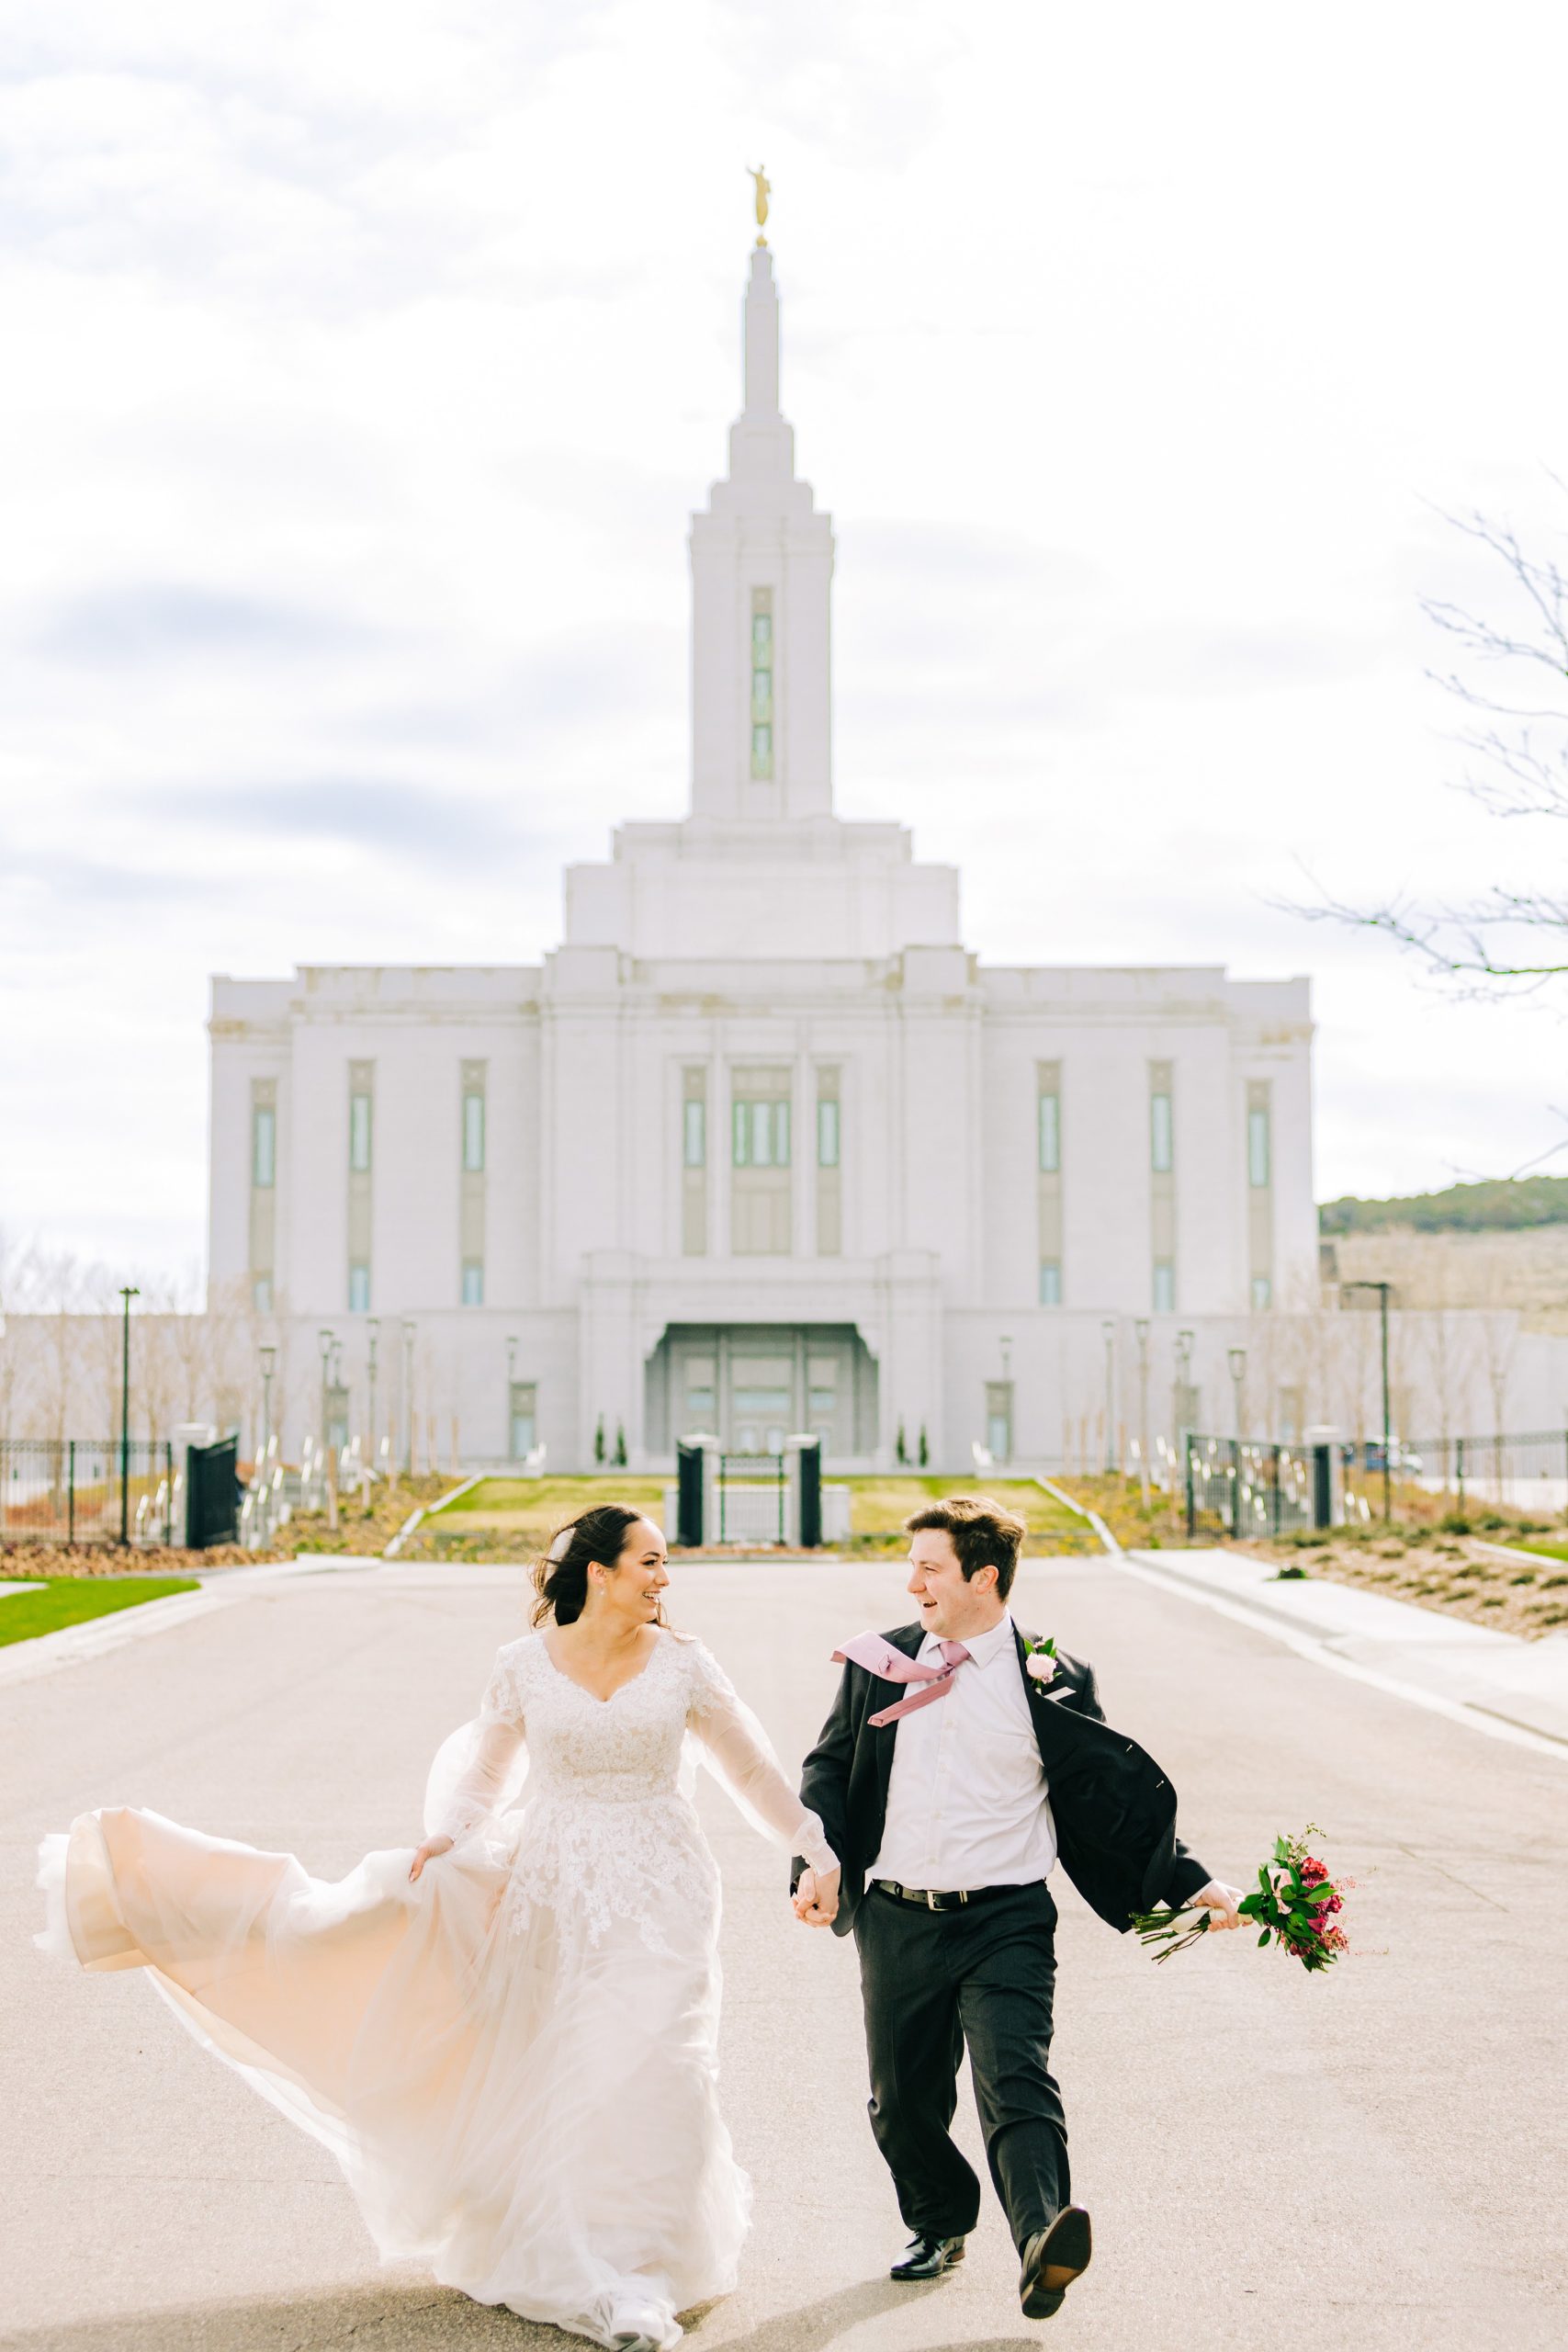 skipping and running away on street in pocatello idaho temple